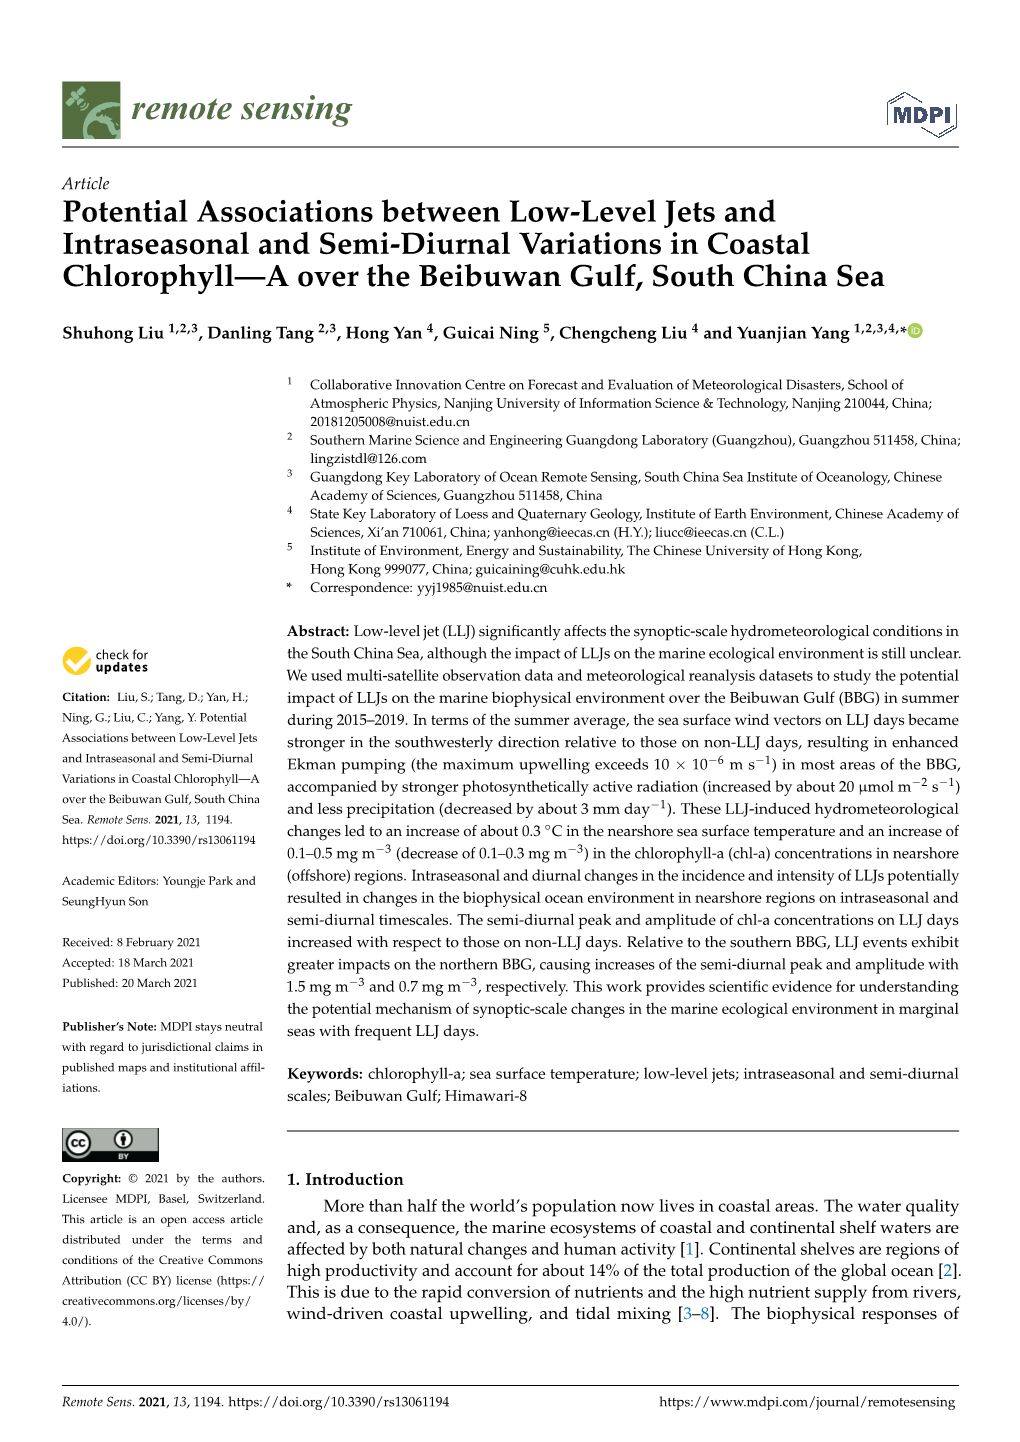 Potential Associations Between Low-Level Jets and Intraseasonal and Semi-Diurnal Variations in Coastal Chlorophyll—A Over the Beibuwan Gulf, South China Sea